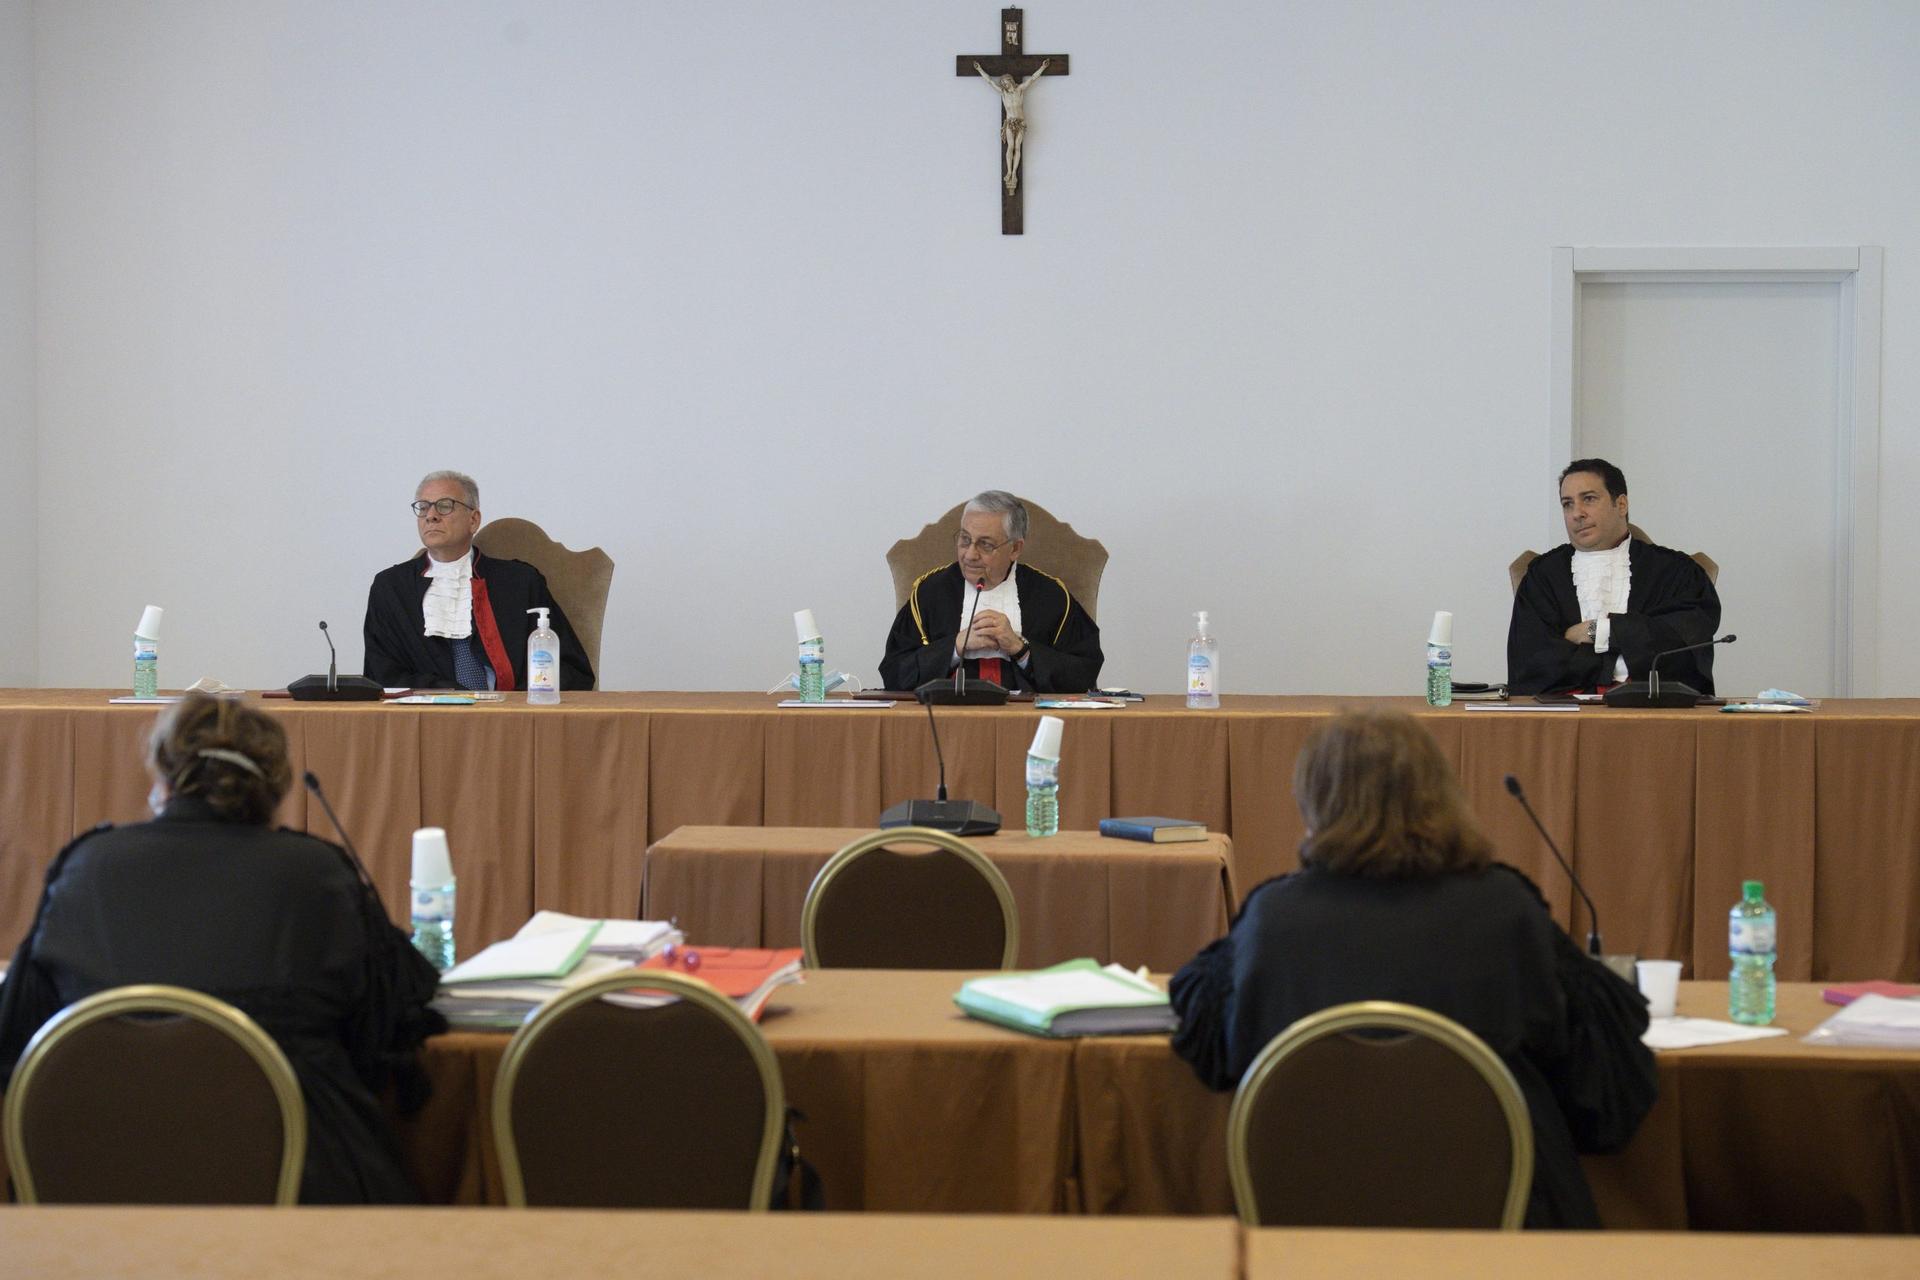 Priests testify at Vatican trial on abuse in minor seminary